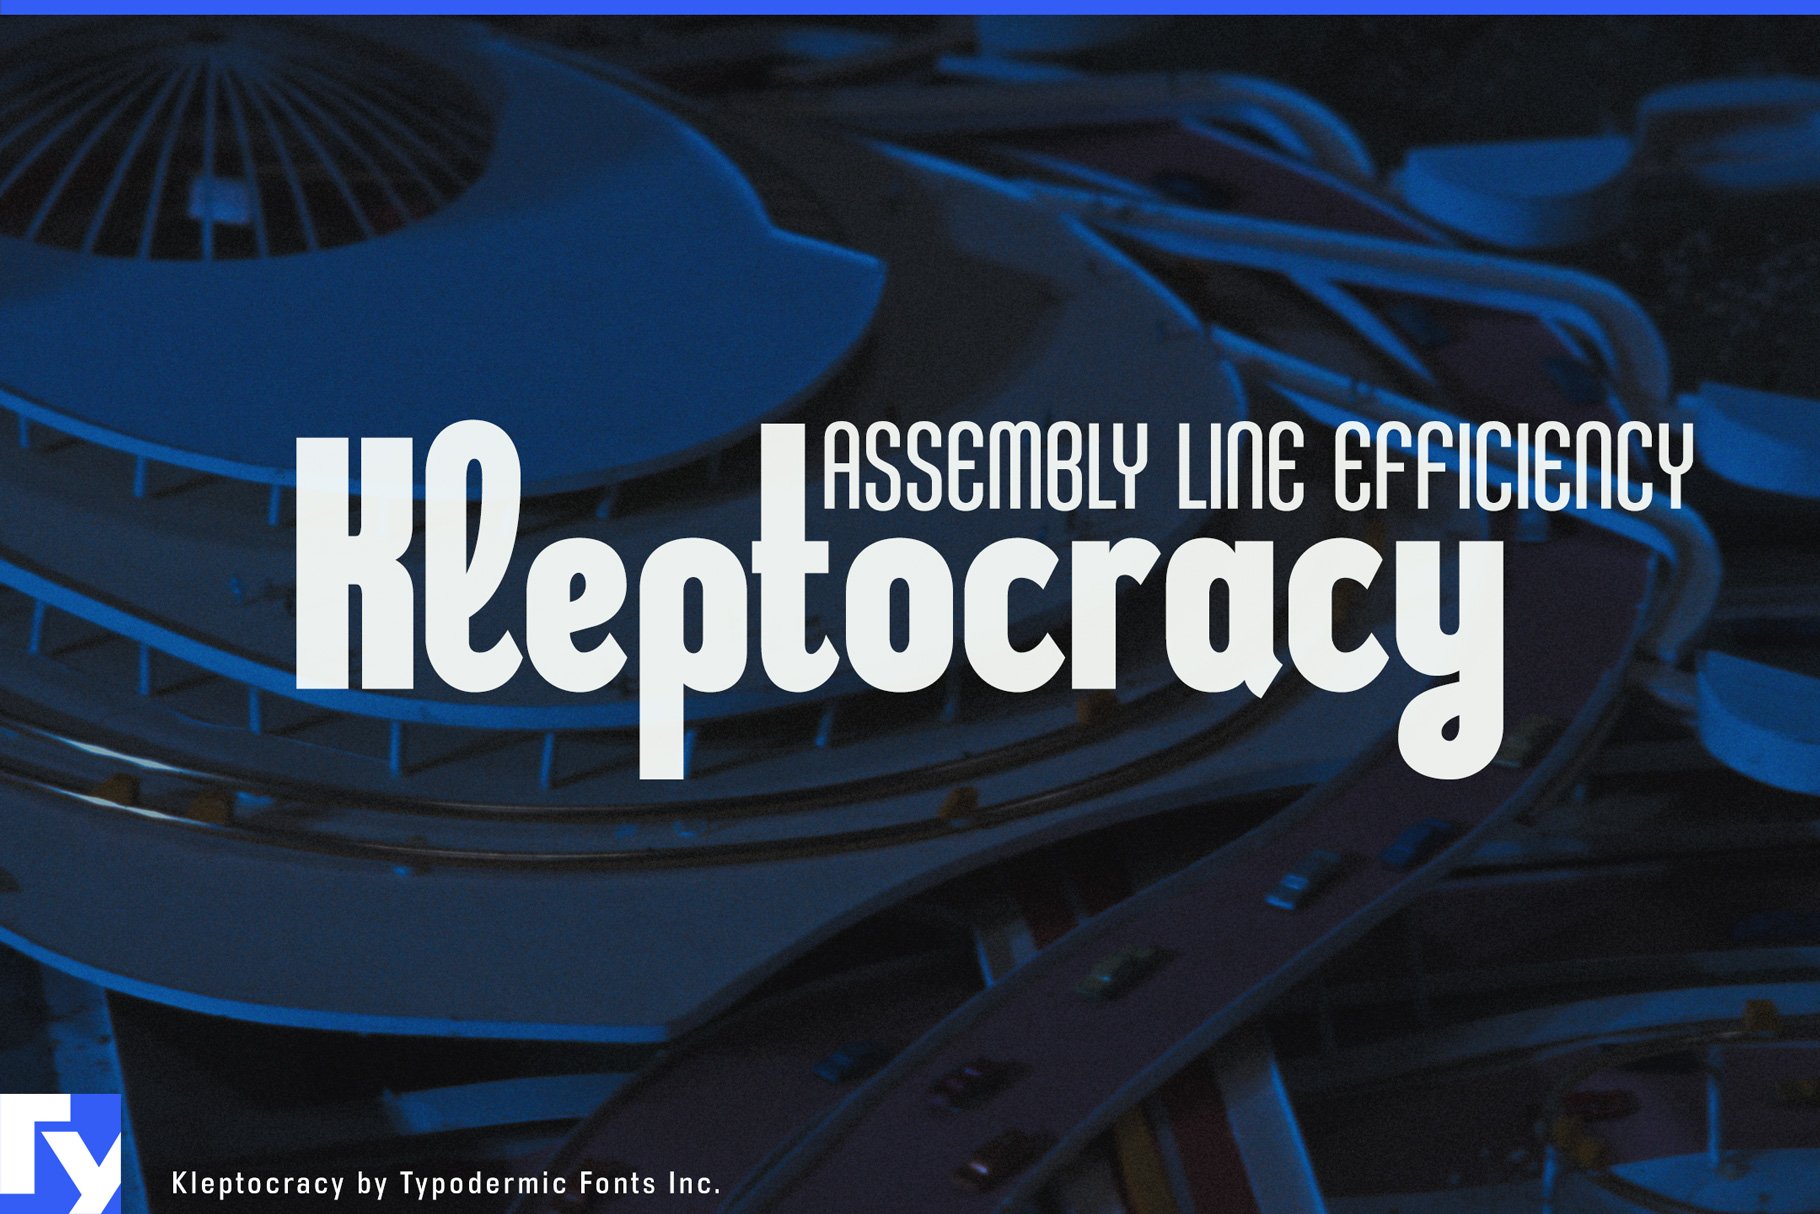 Kleptocracy cover image.